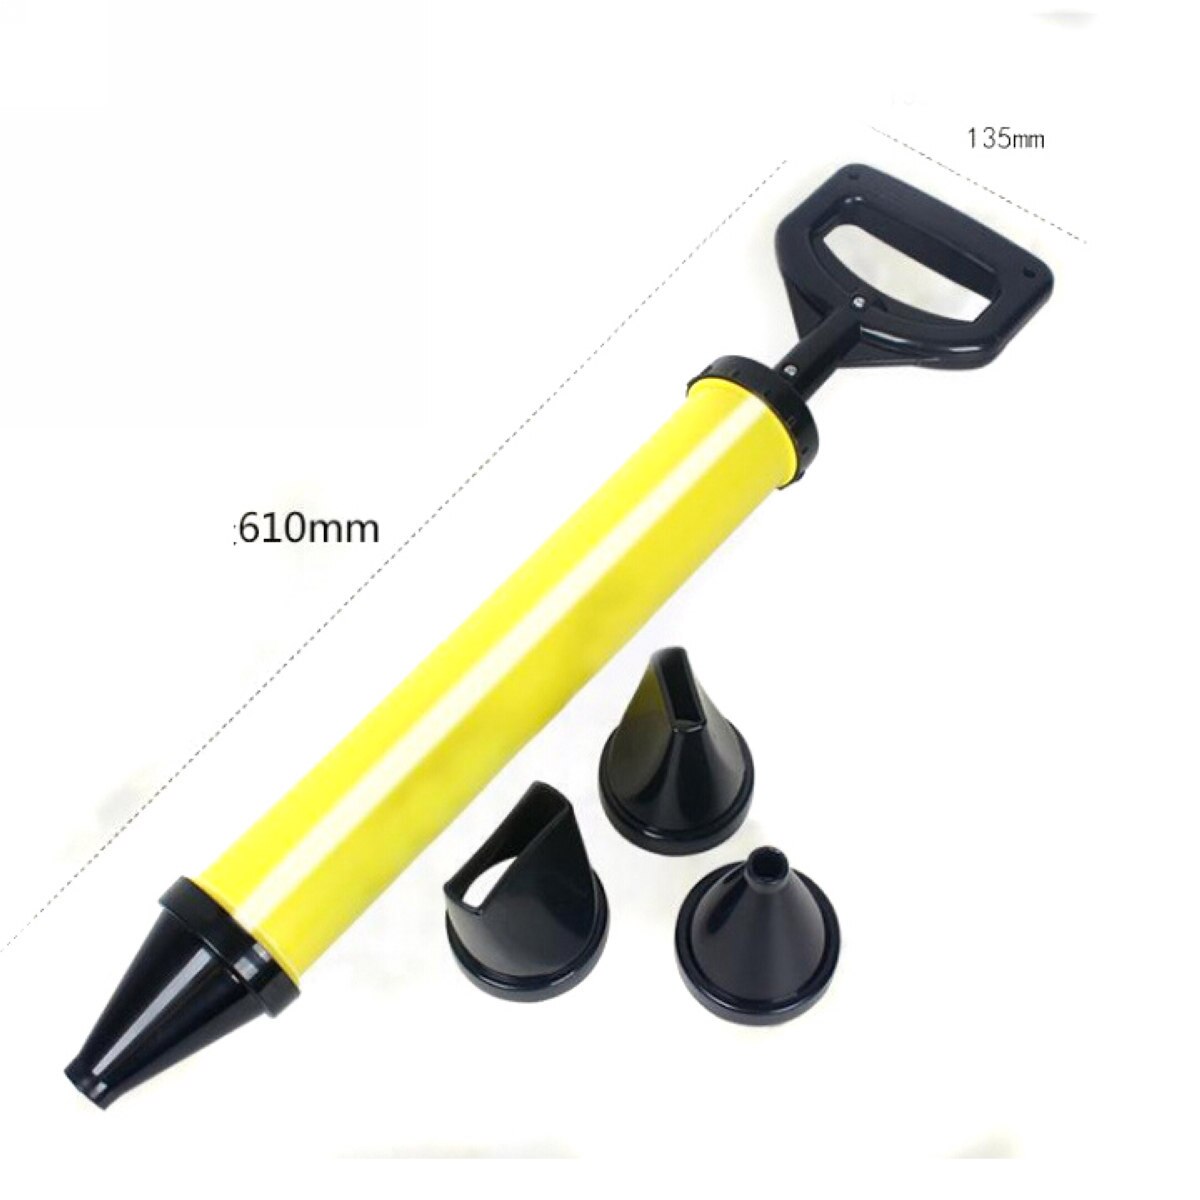 Pointing Brick Grouting Mortar Sprayer Applicator Tool for  Cement lime 4 Nozzle